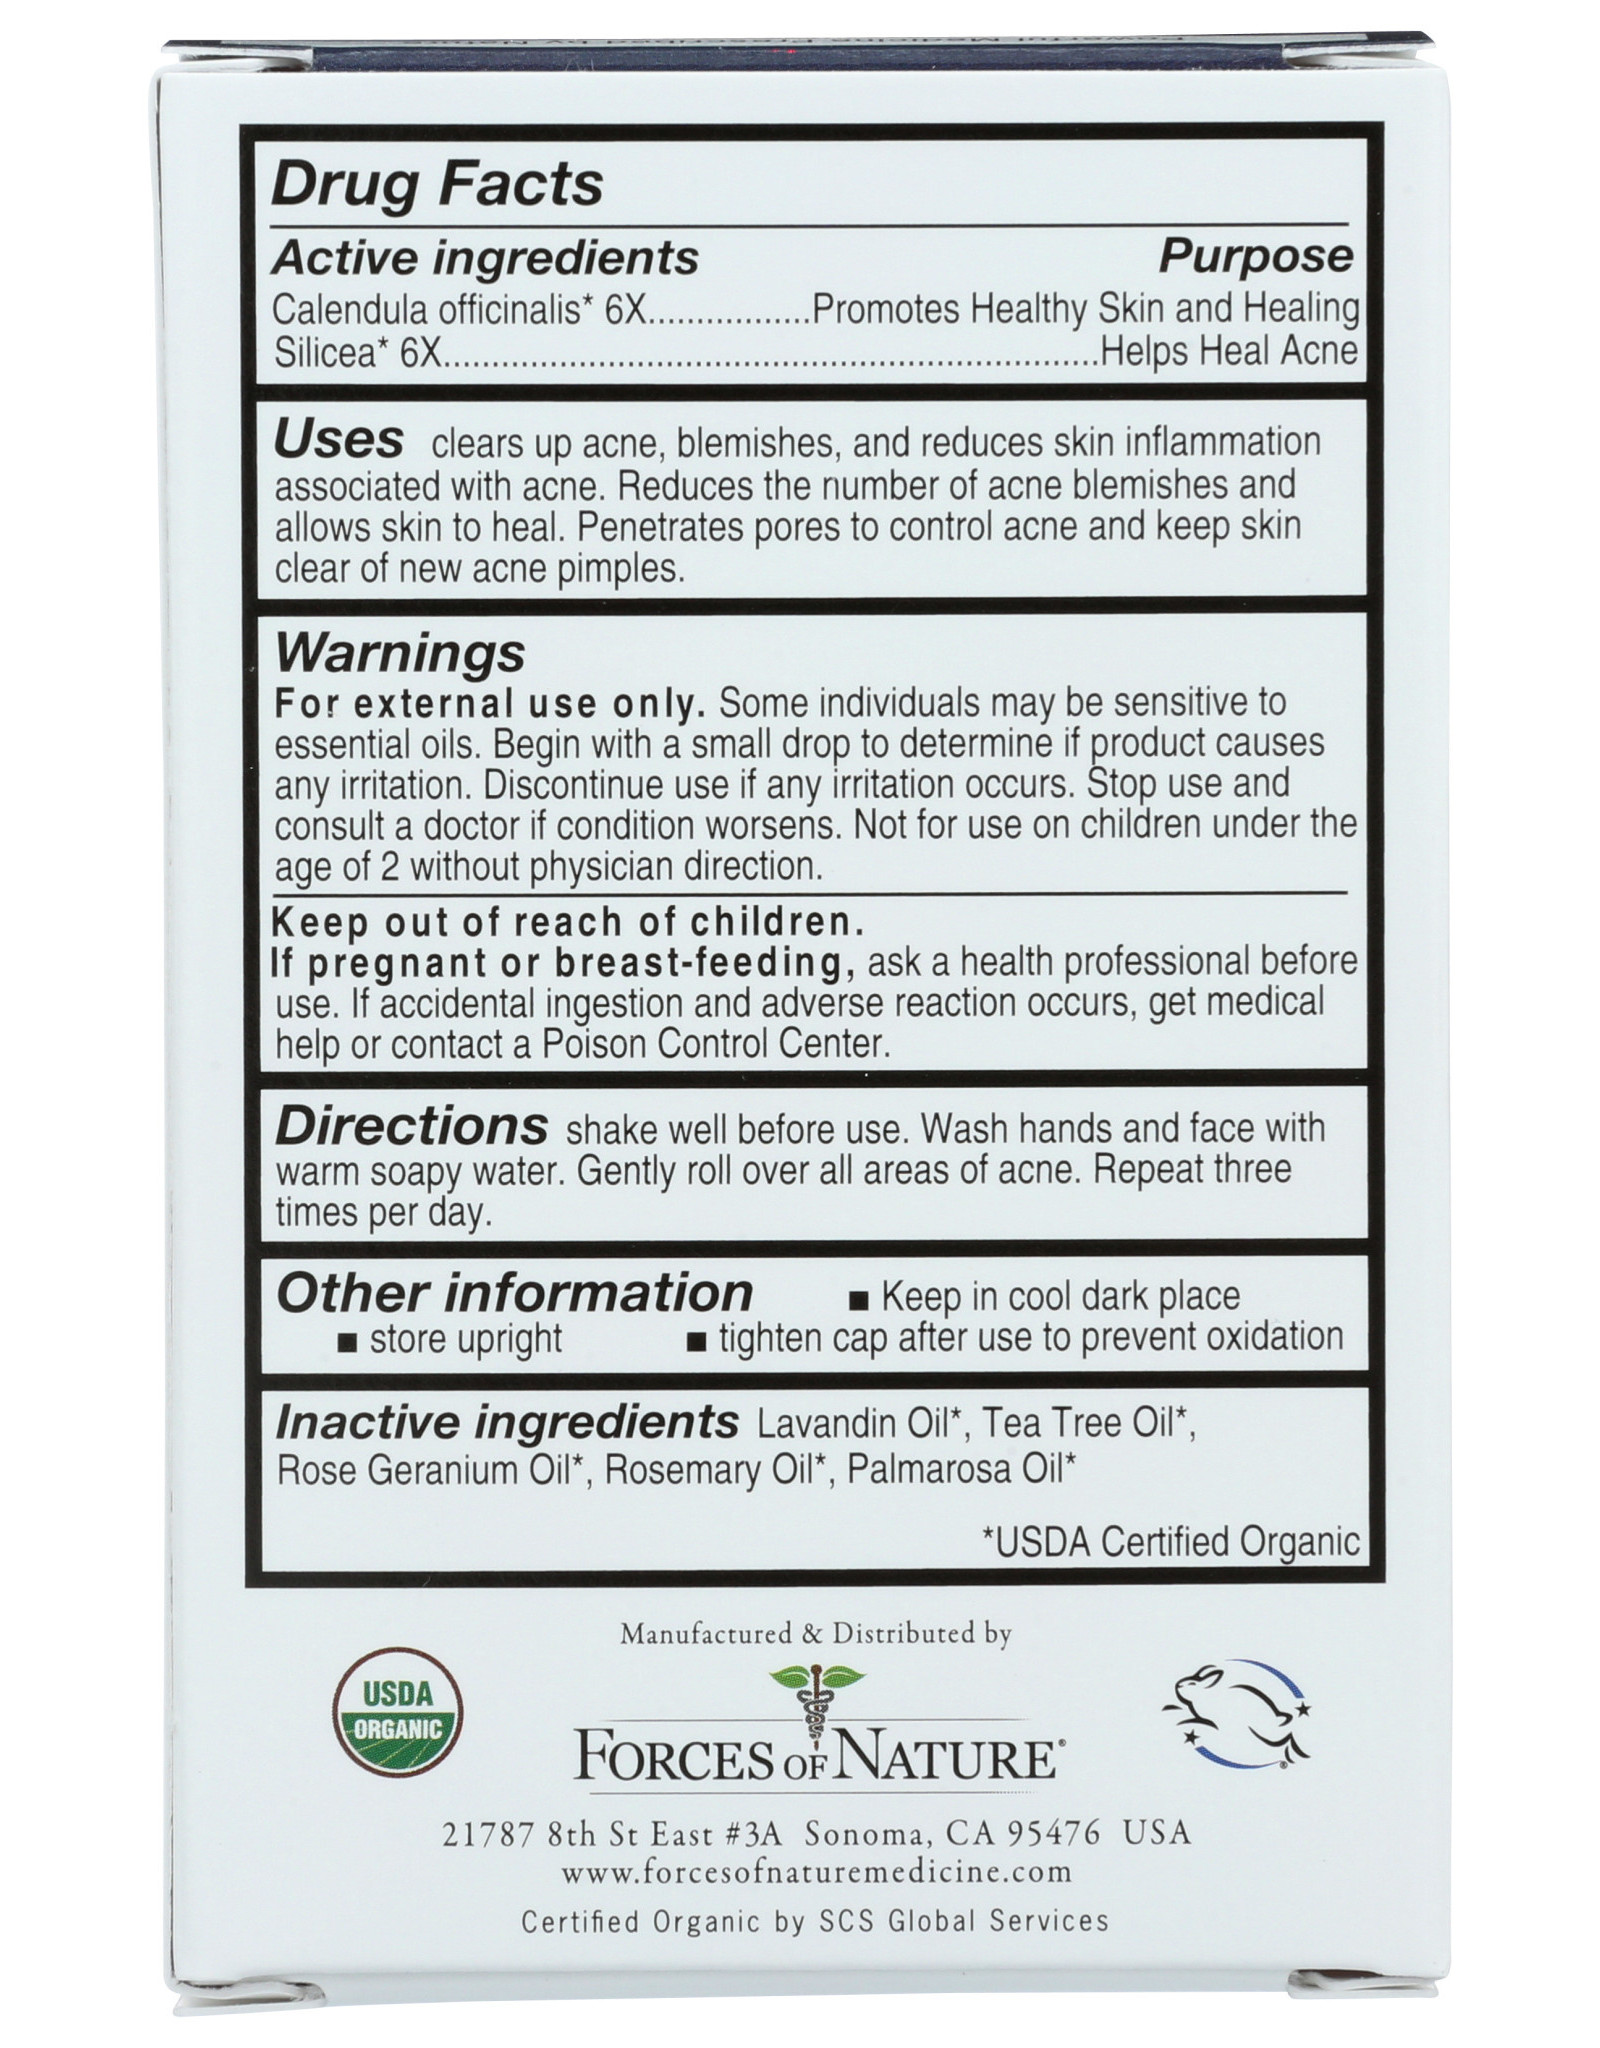 FORCES OF NATURE FORCES OF NATURE ACNE/PIMPLE ROLLERBALL APPLICATOR, 0.14 OZ.